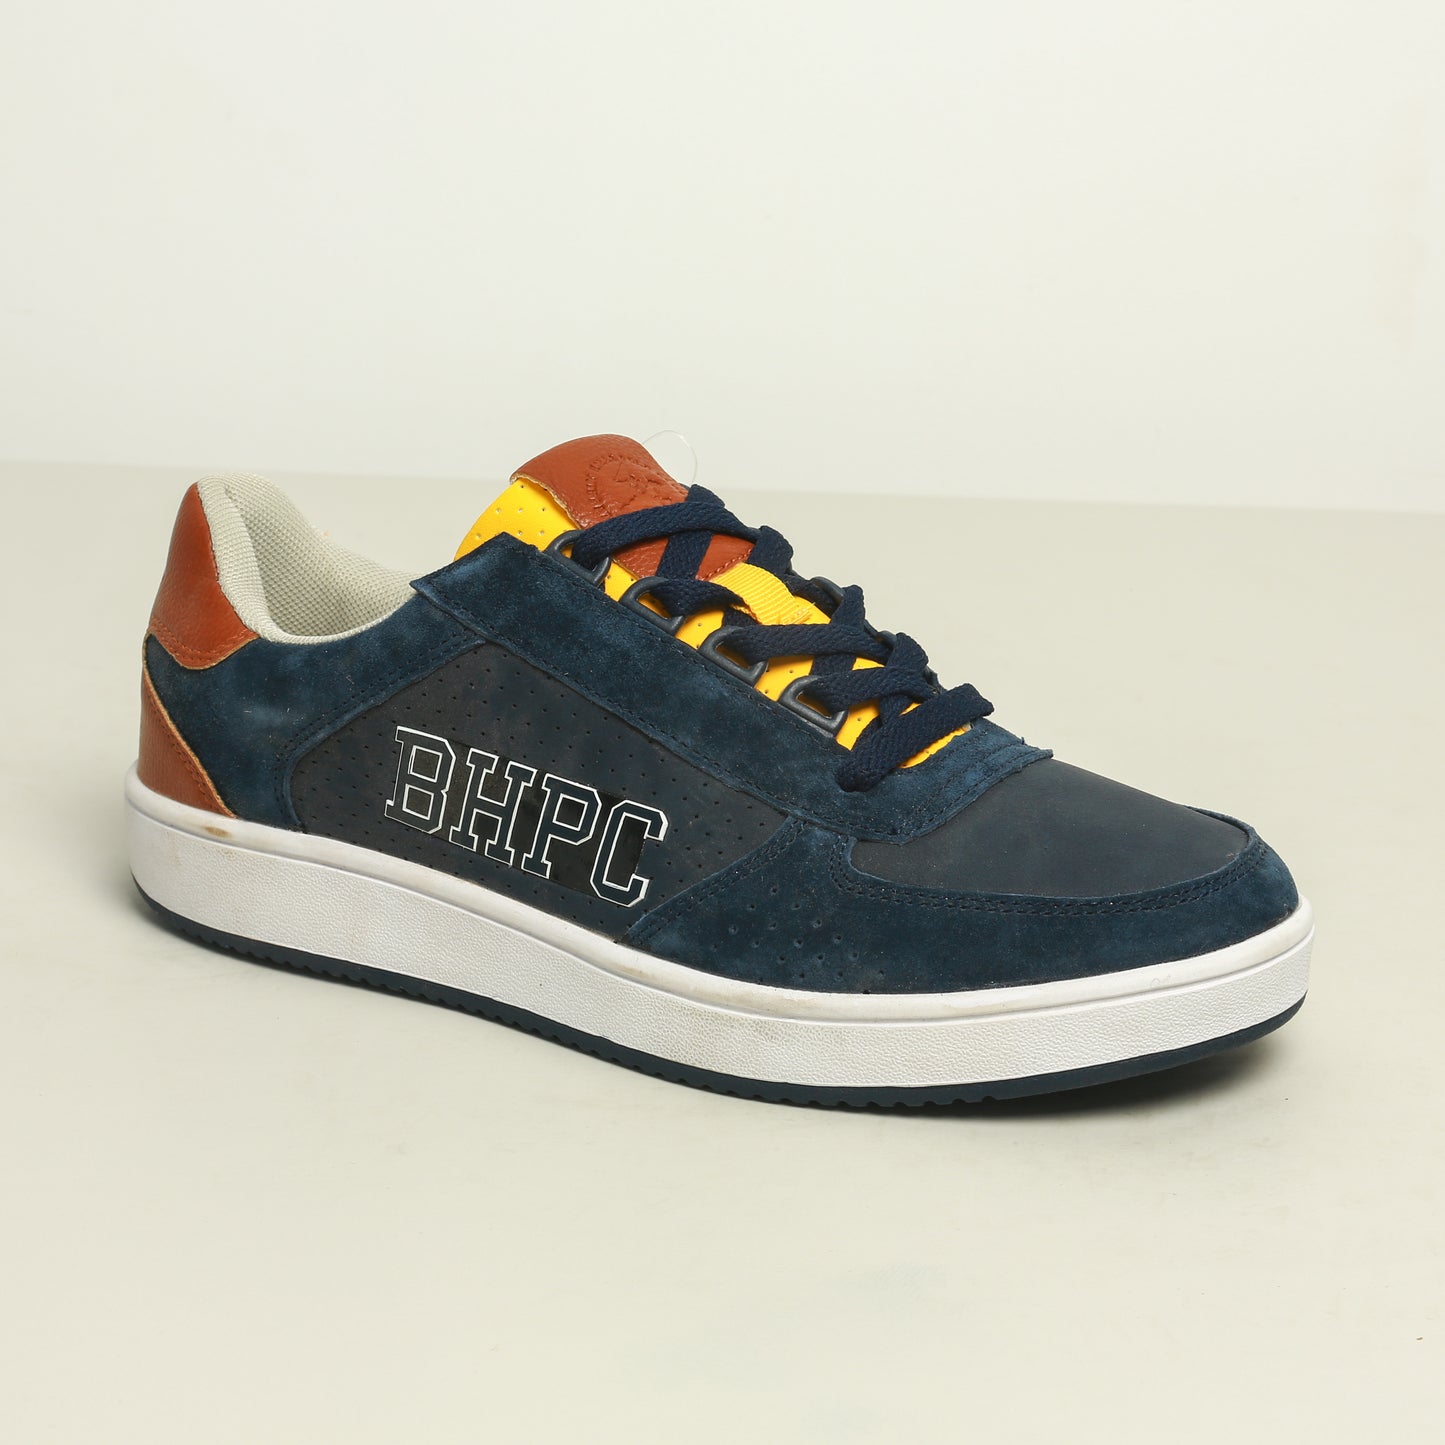 Sneakers Bevely Hills Polo Club - Bleu marine